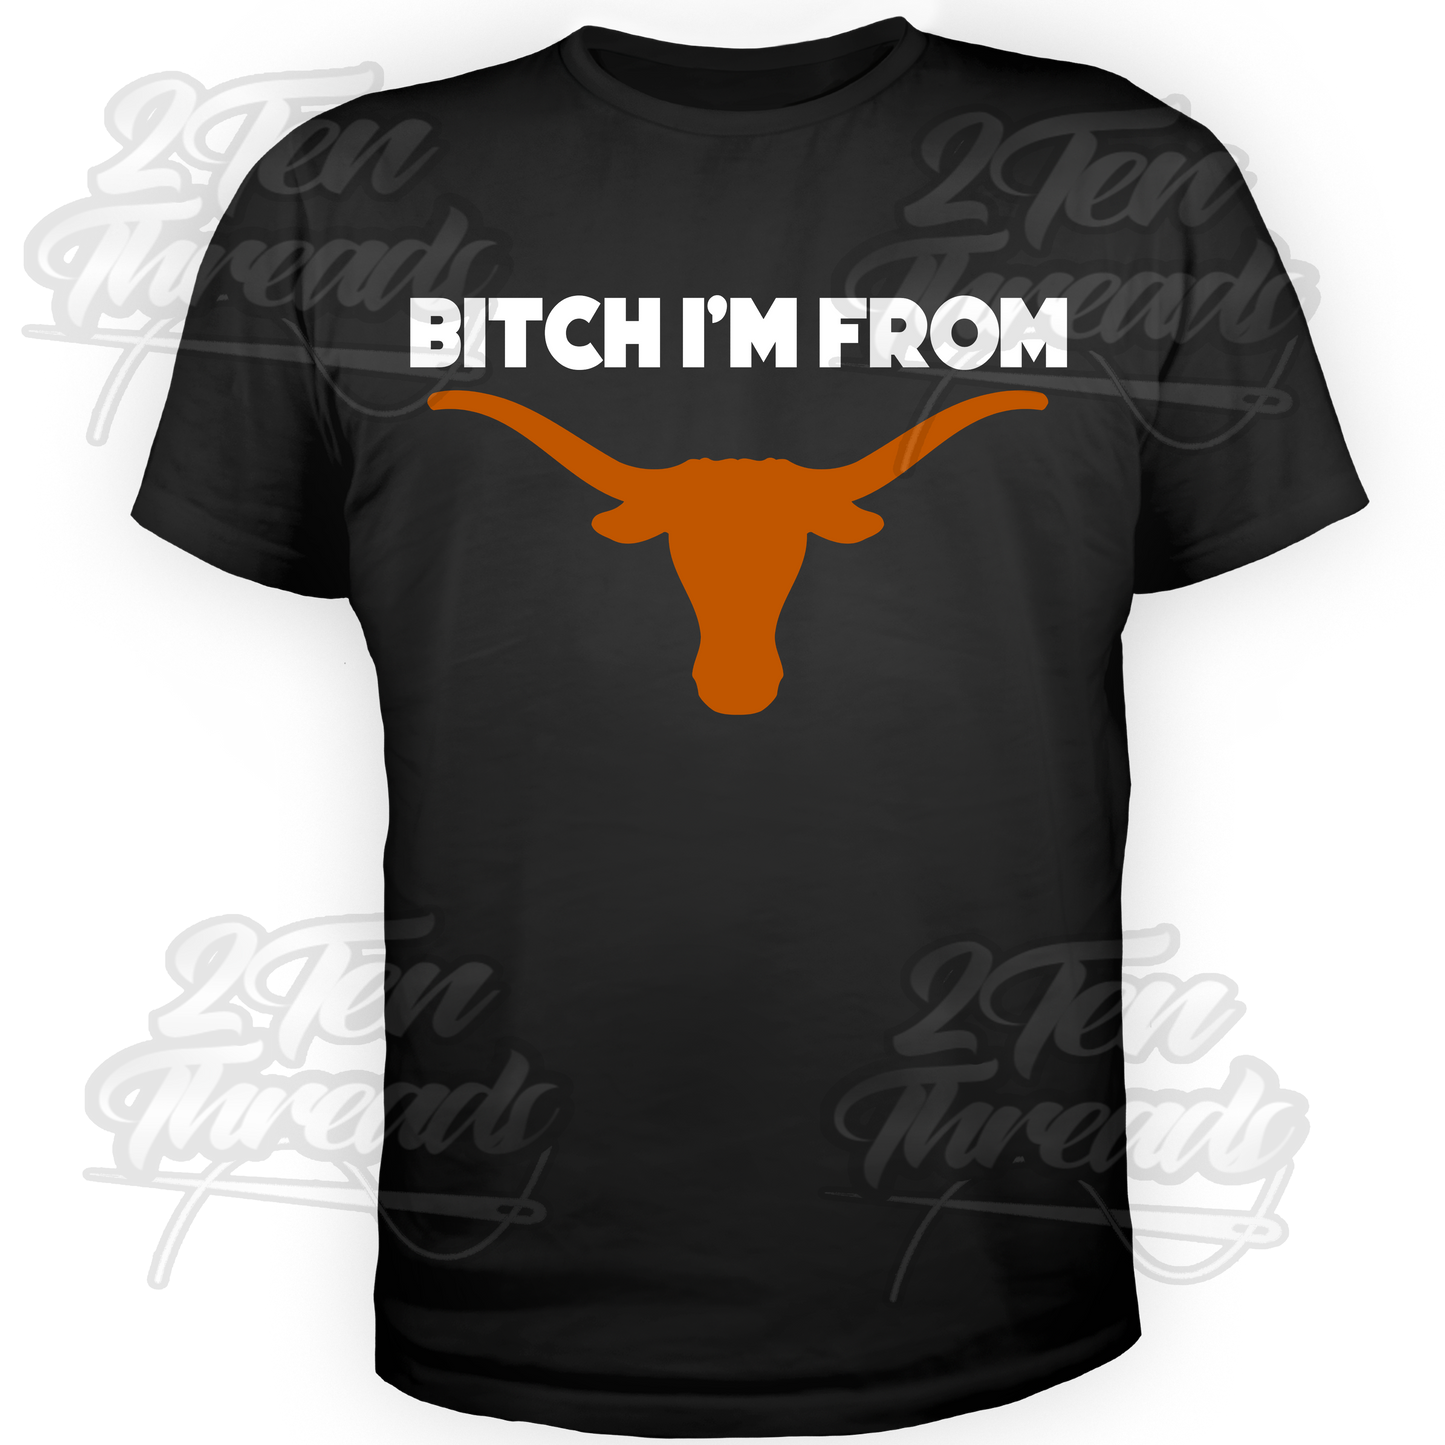 Bitch I'm From Texas Shirt